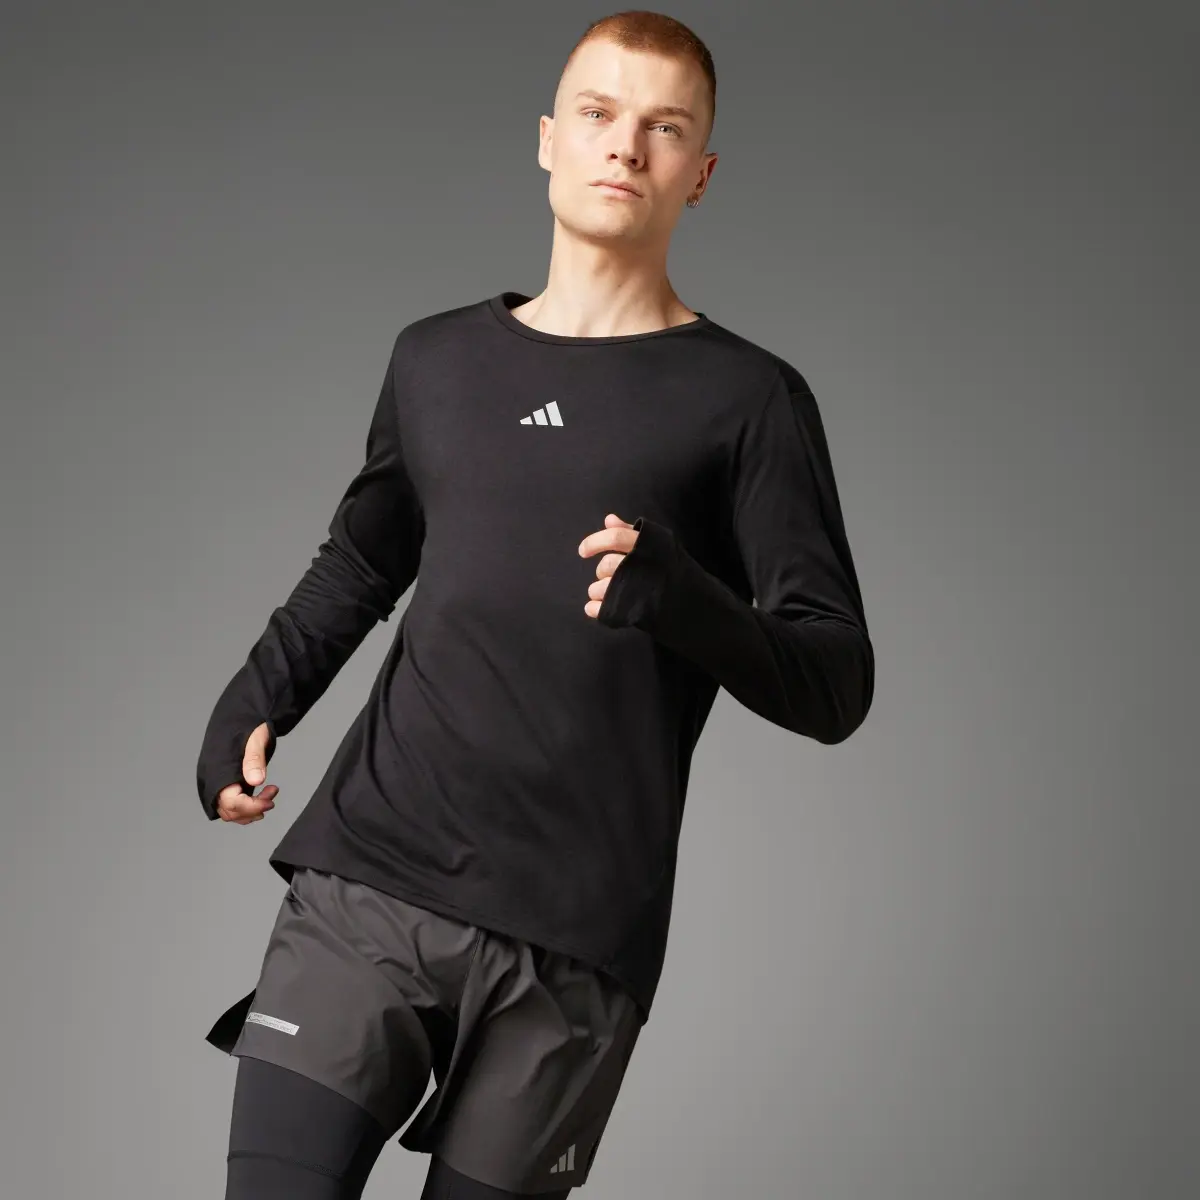 Adidas Ultimate Running Conquer the Elements Merino Longsleeve. 1